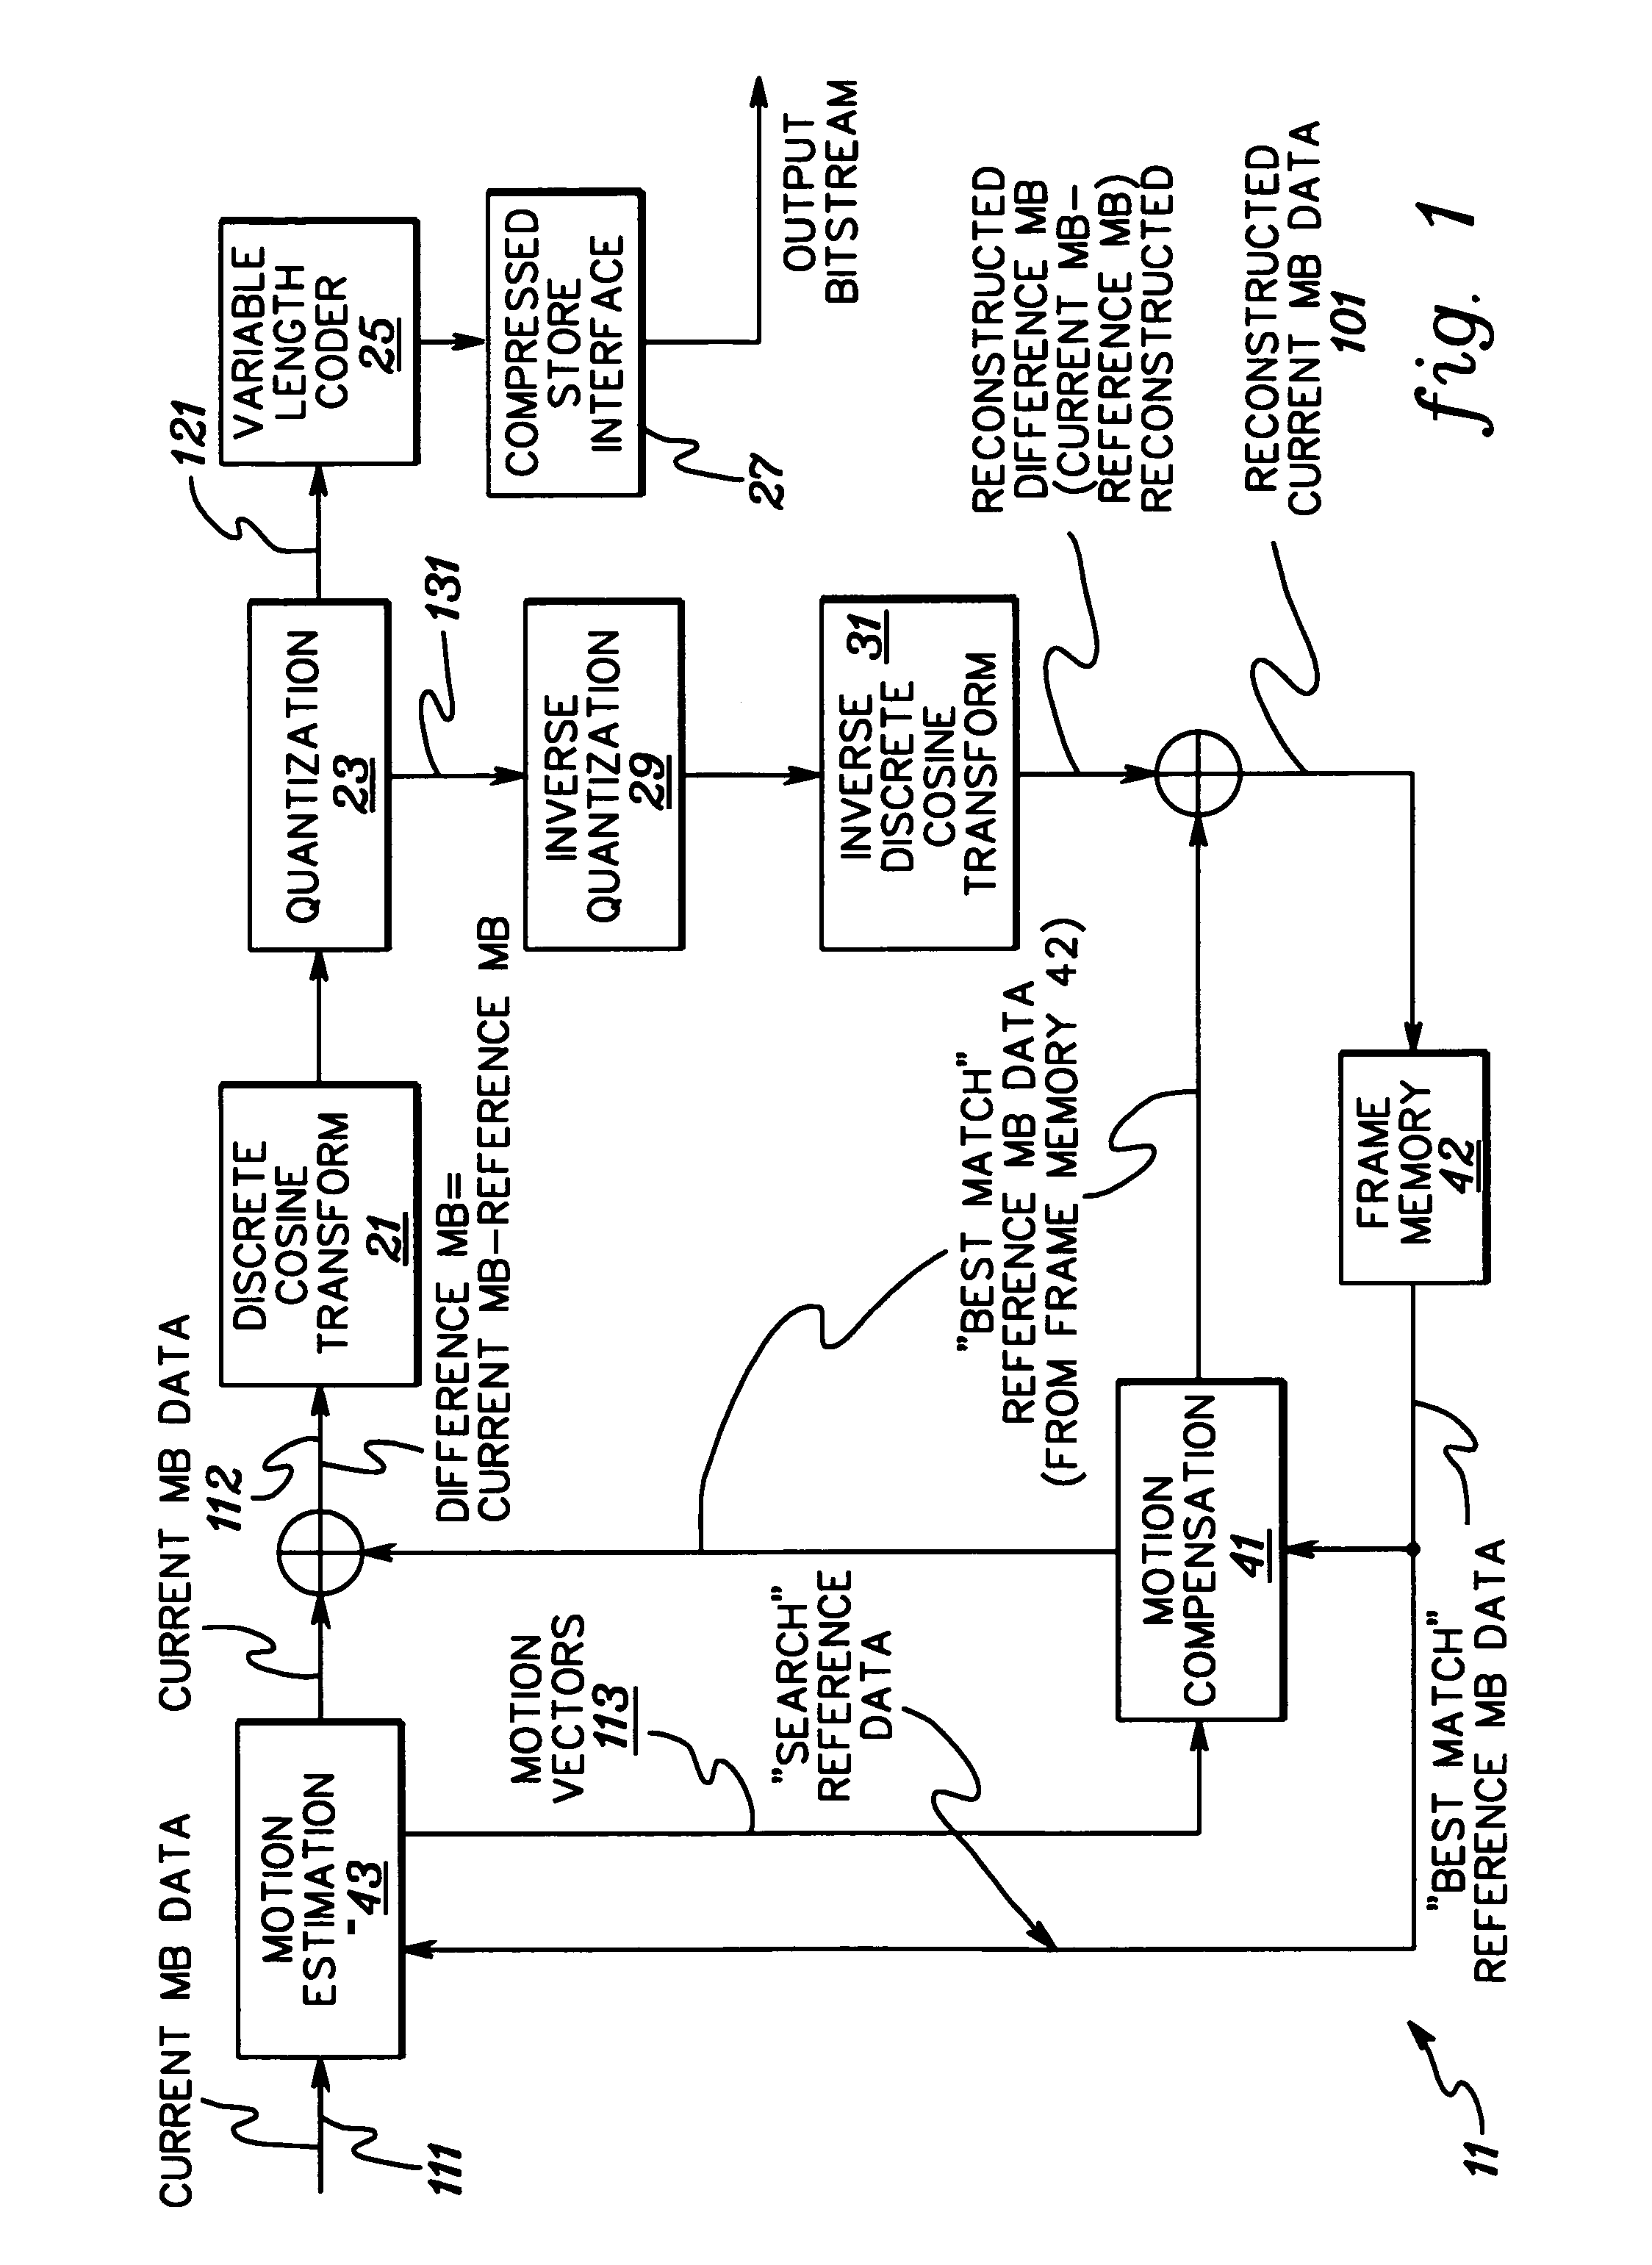 Dynamically switching quant matrix tables within an MPEG-2 encoder